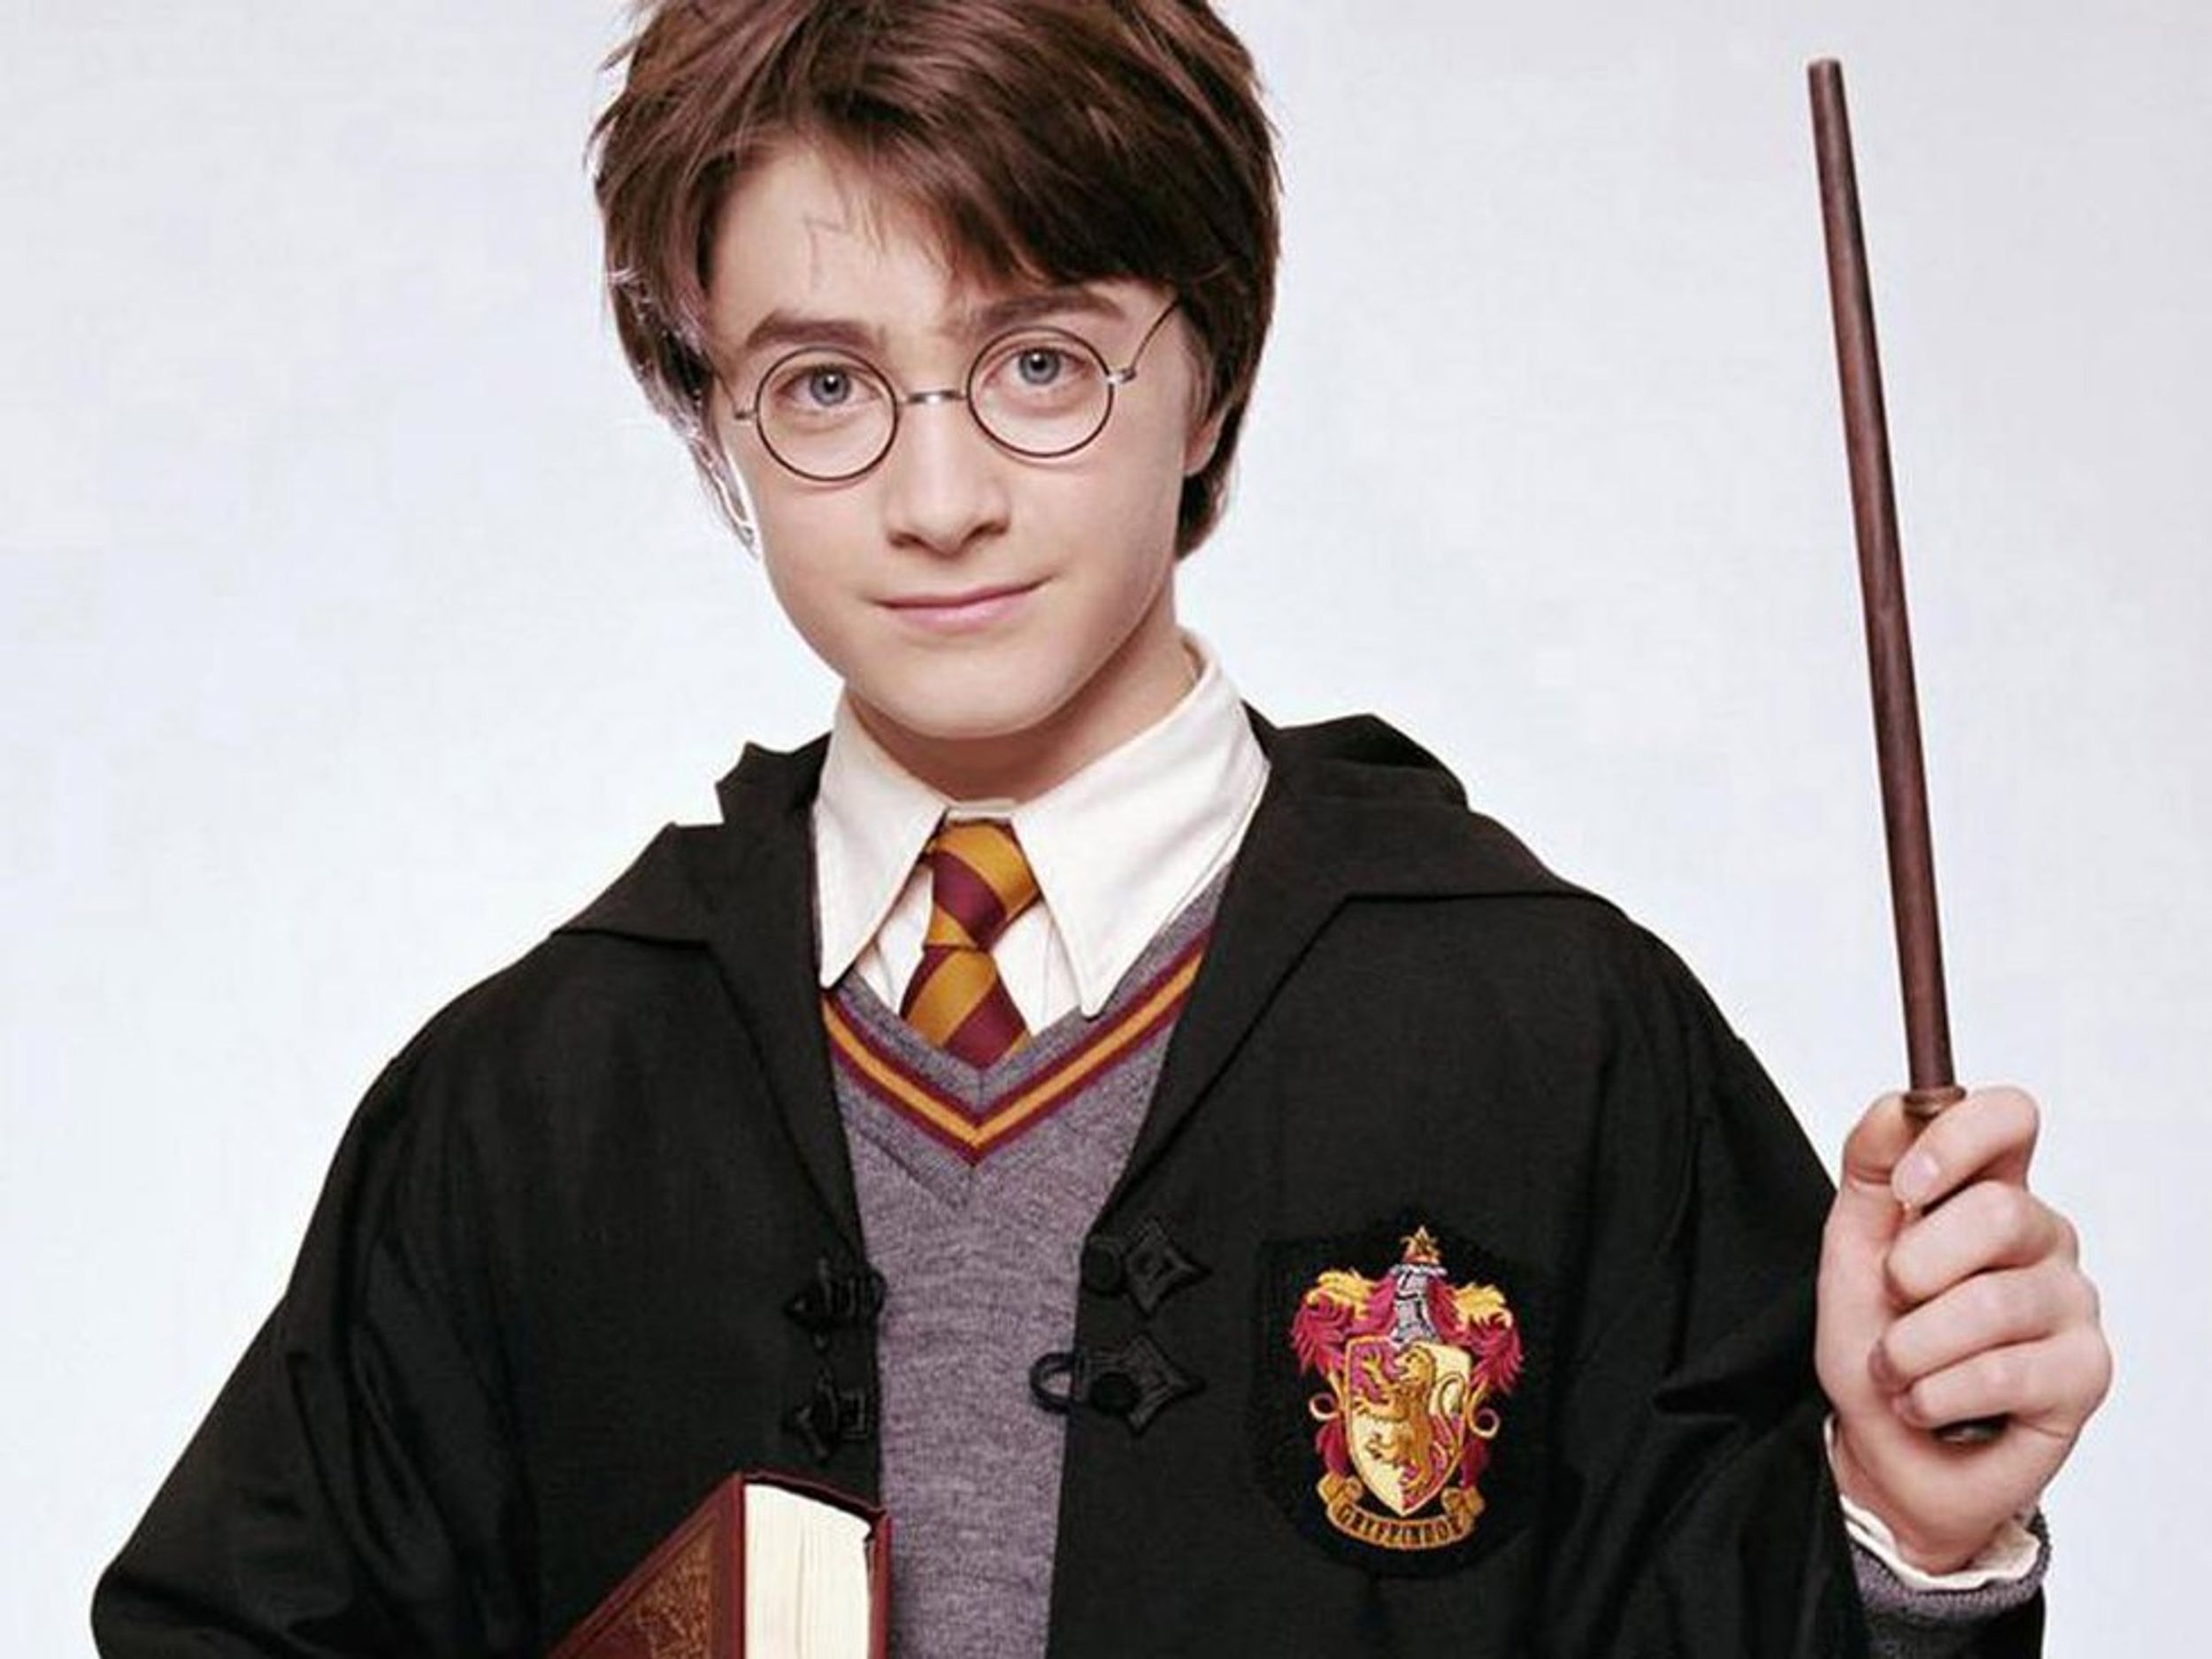 8 Things the Harry Potter Series has Taught Me